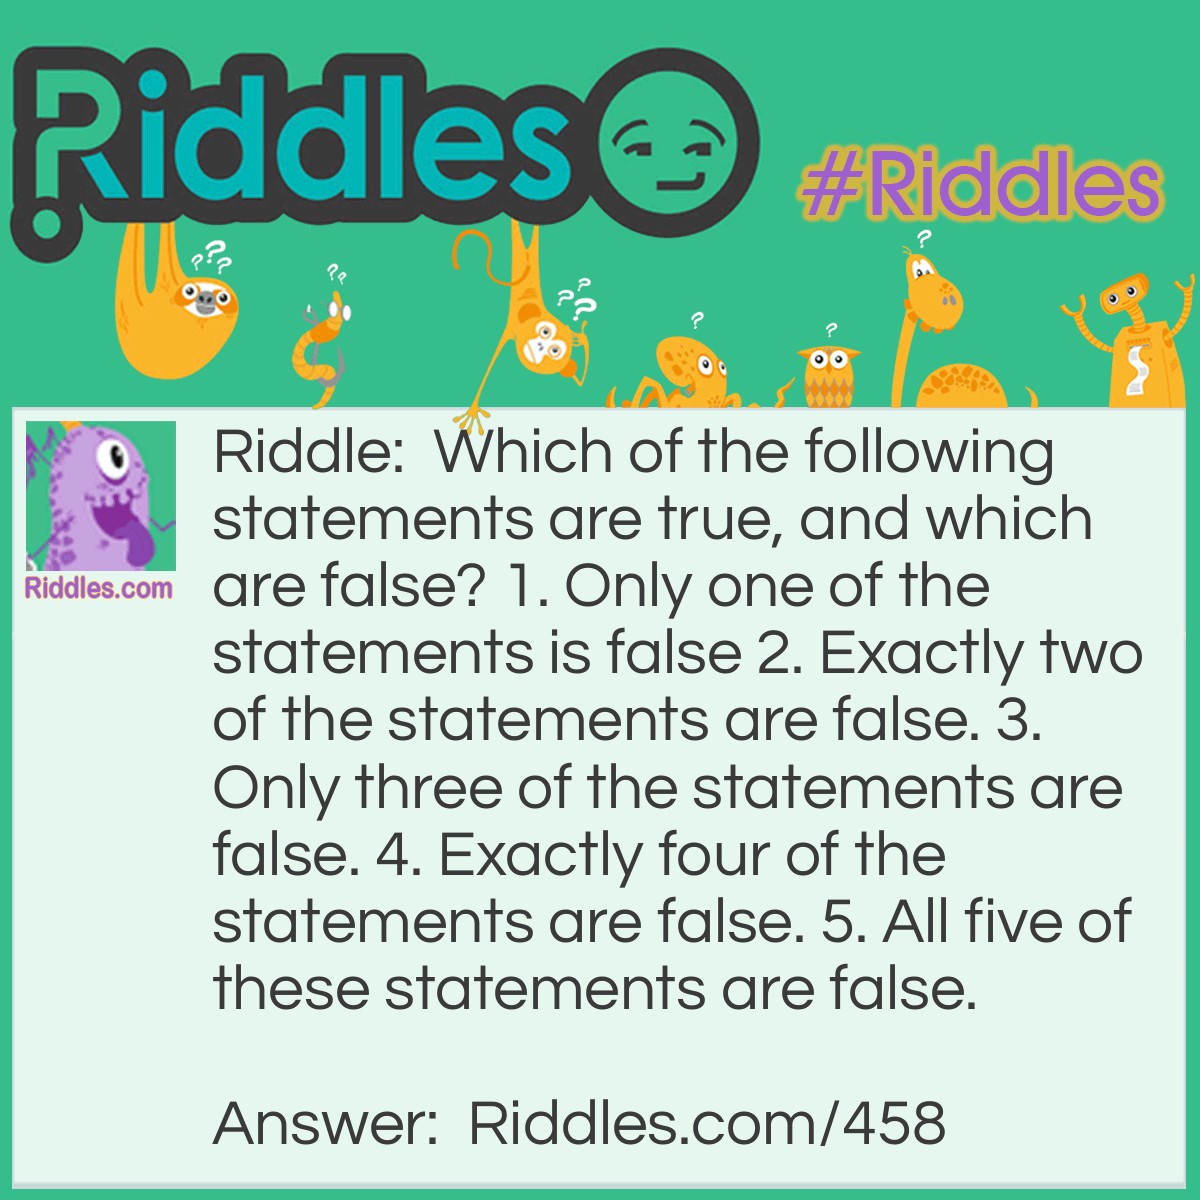 Riddle: Which of the following statements are true, and which are false? 1. Only one of the statements is false 2. Exactly two of the statements are false. 3. Only three of the statements are false. 4. Exactly four of the statements are false. 5. All five of these statements are false. Answer: The only true statement can be #4. The others are false. #5 can't be true, because it says all the statements are false.